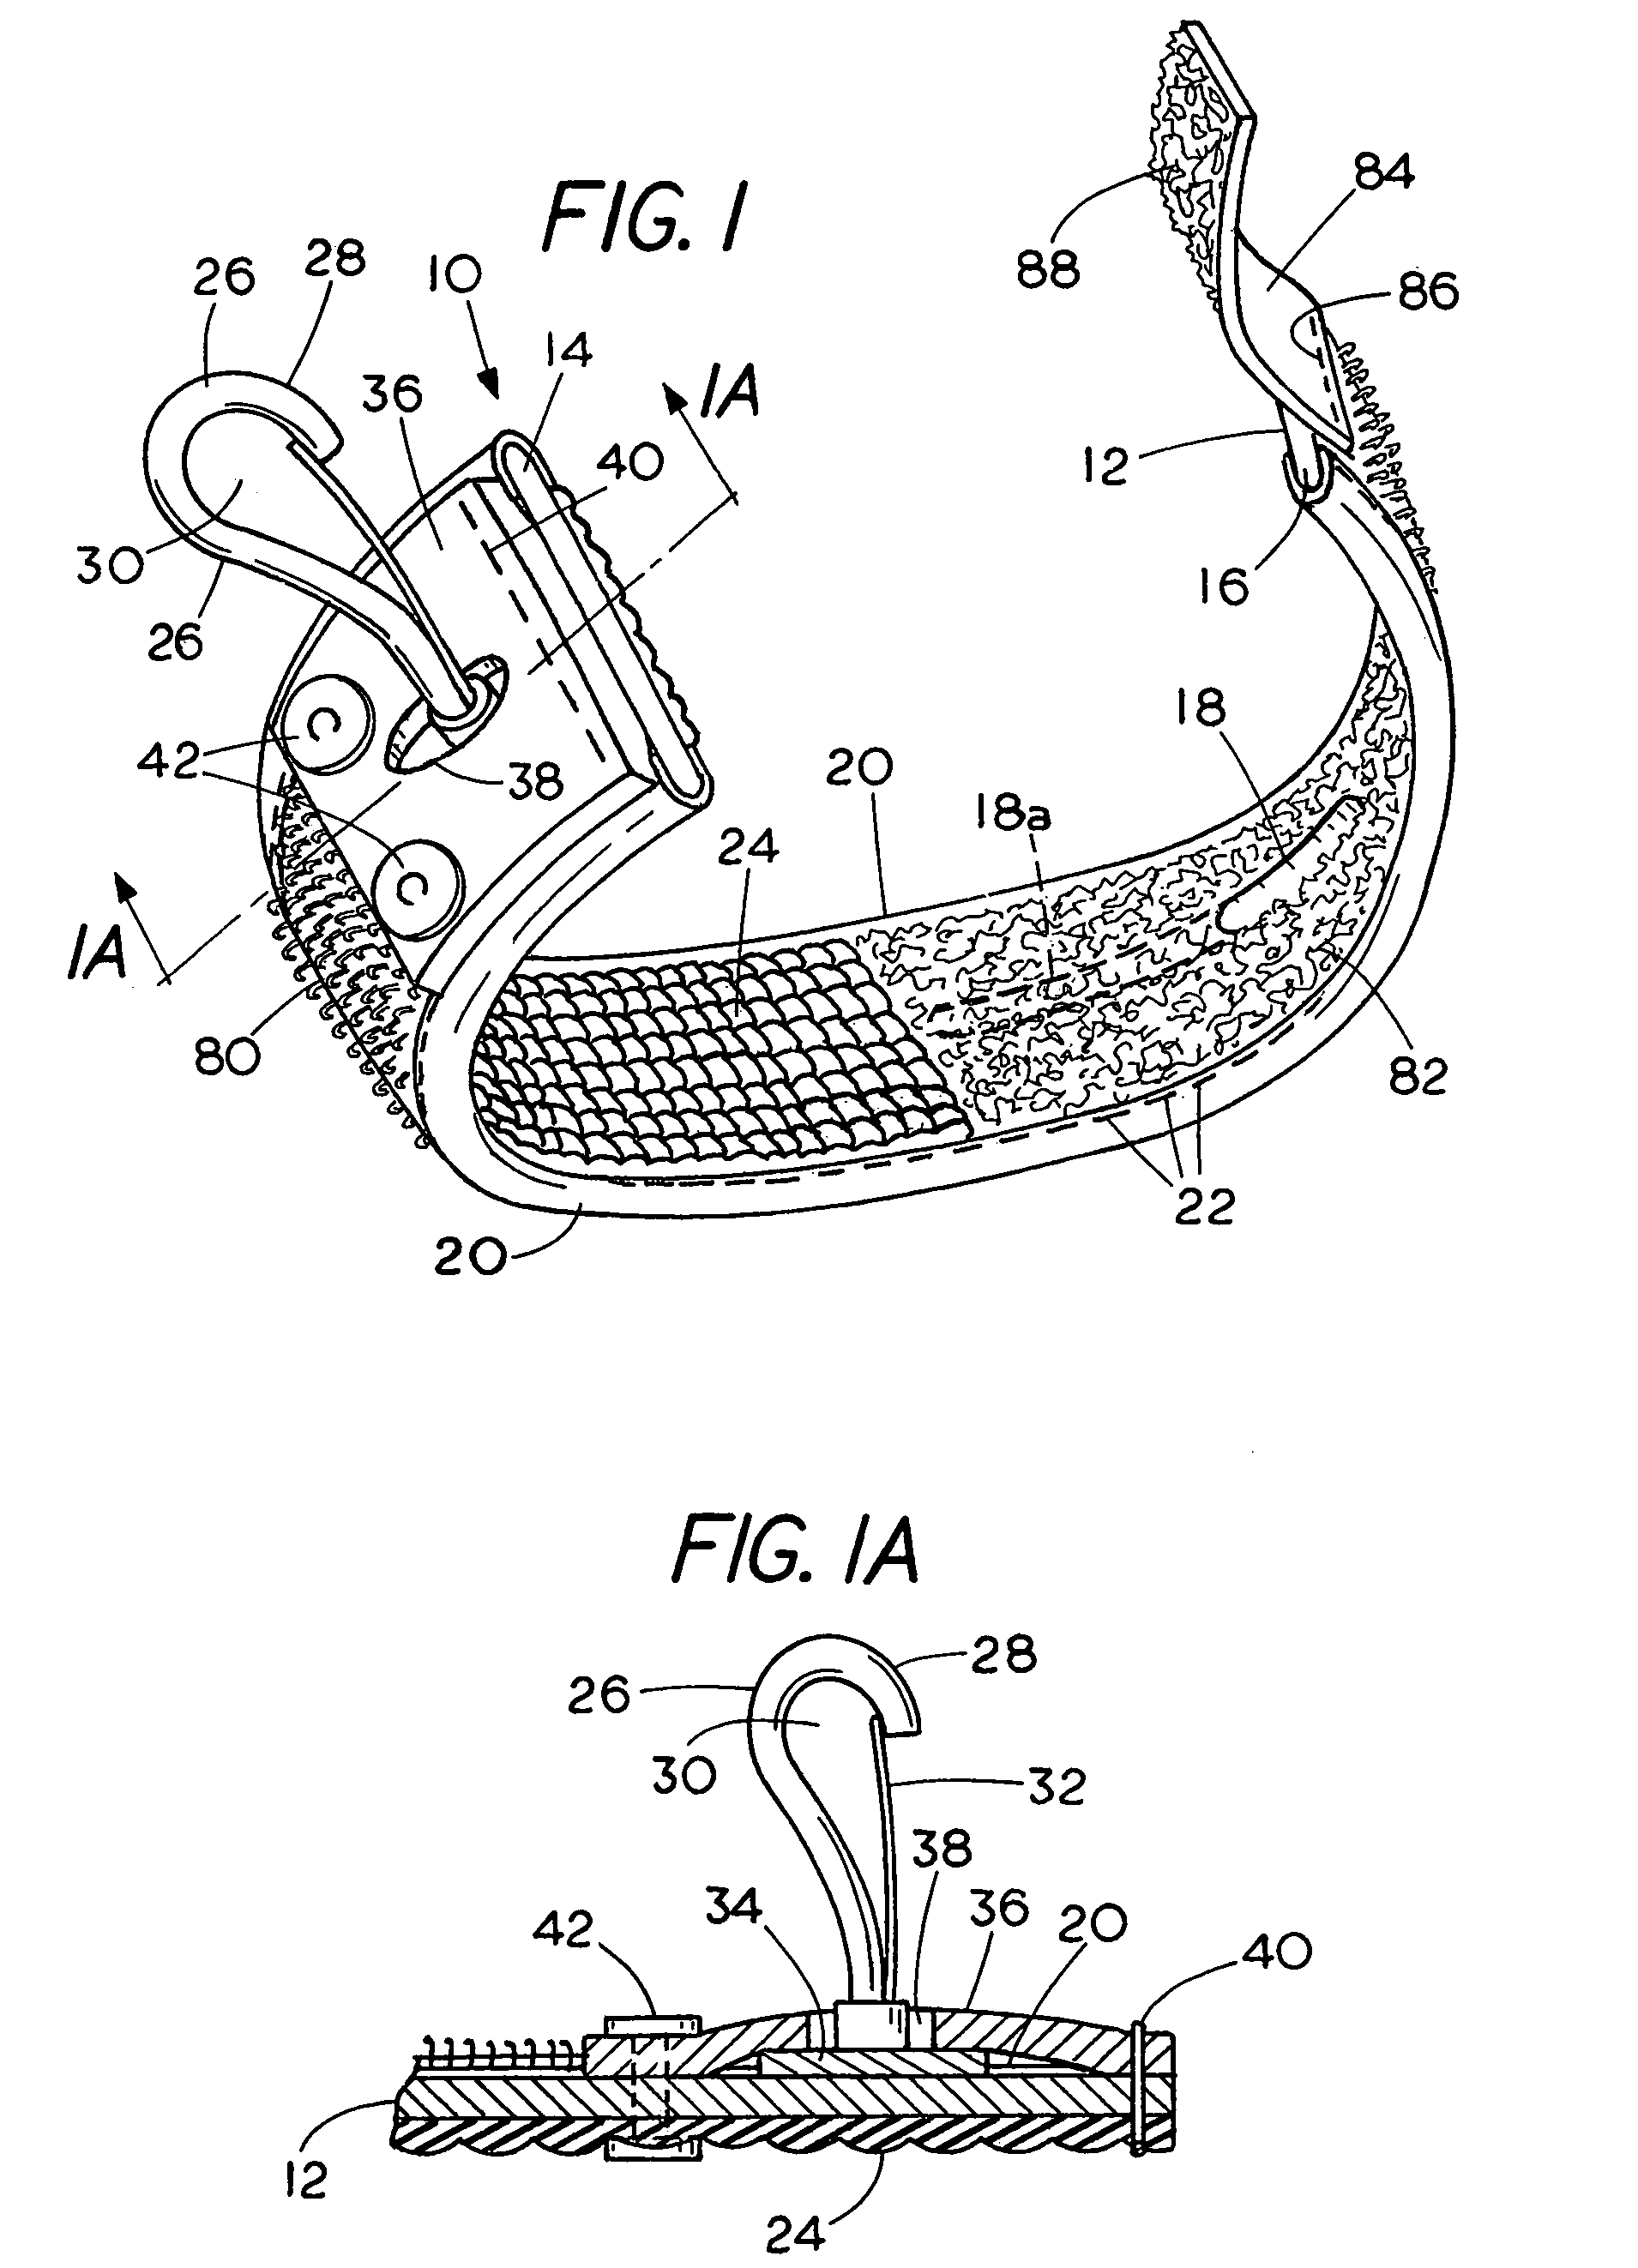 Tie-down wrap device for securing articles for shipment